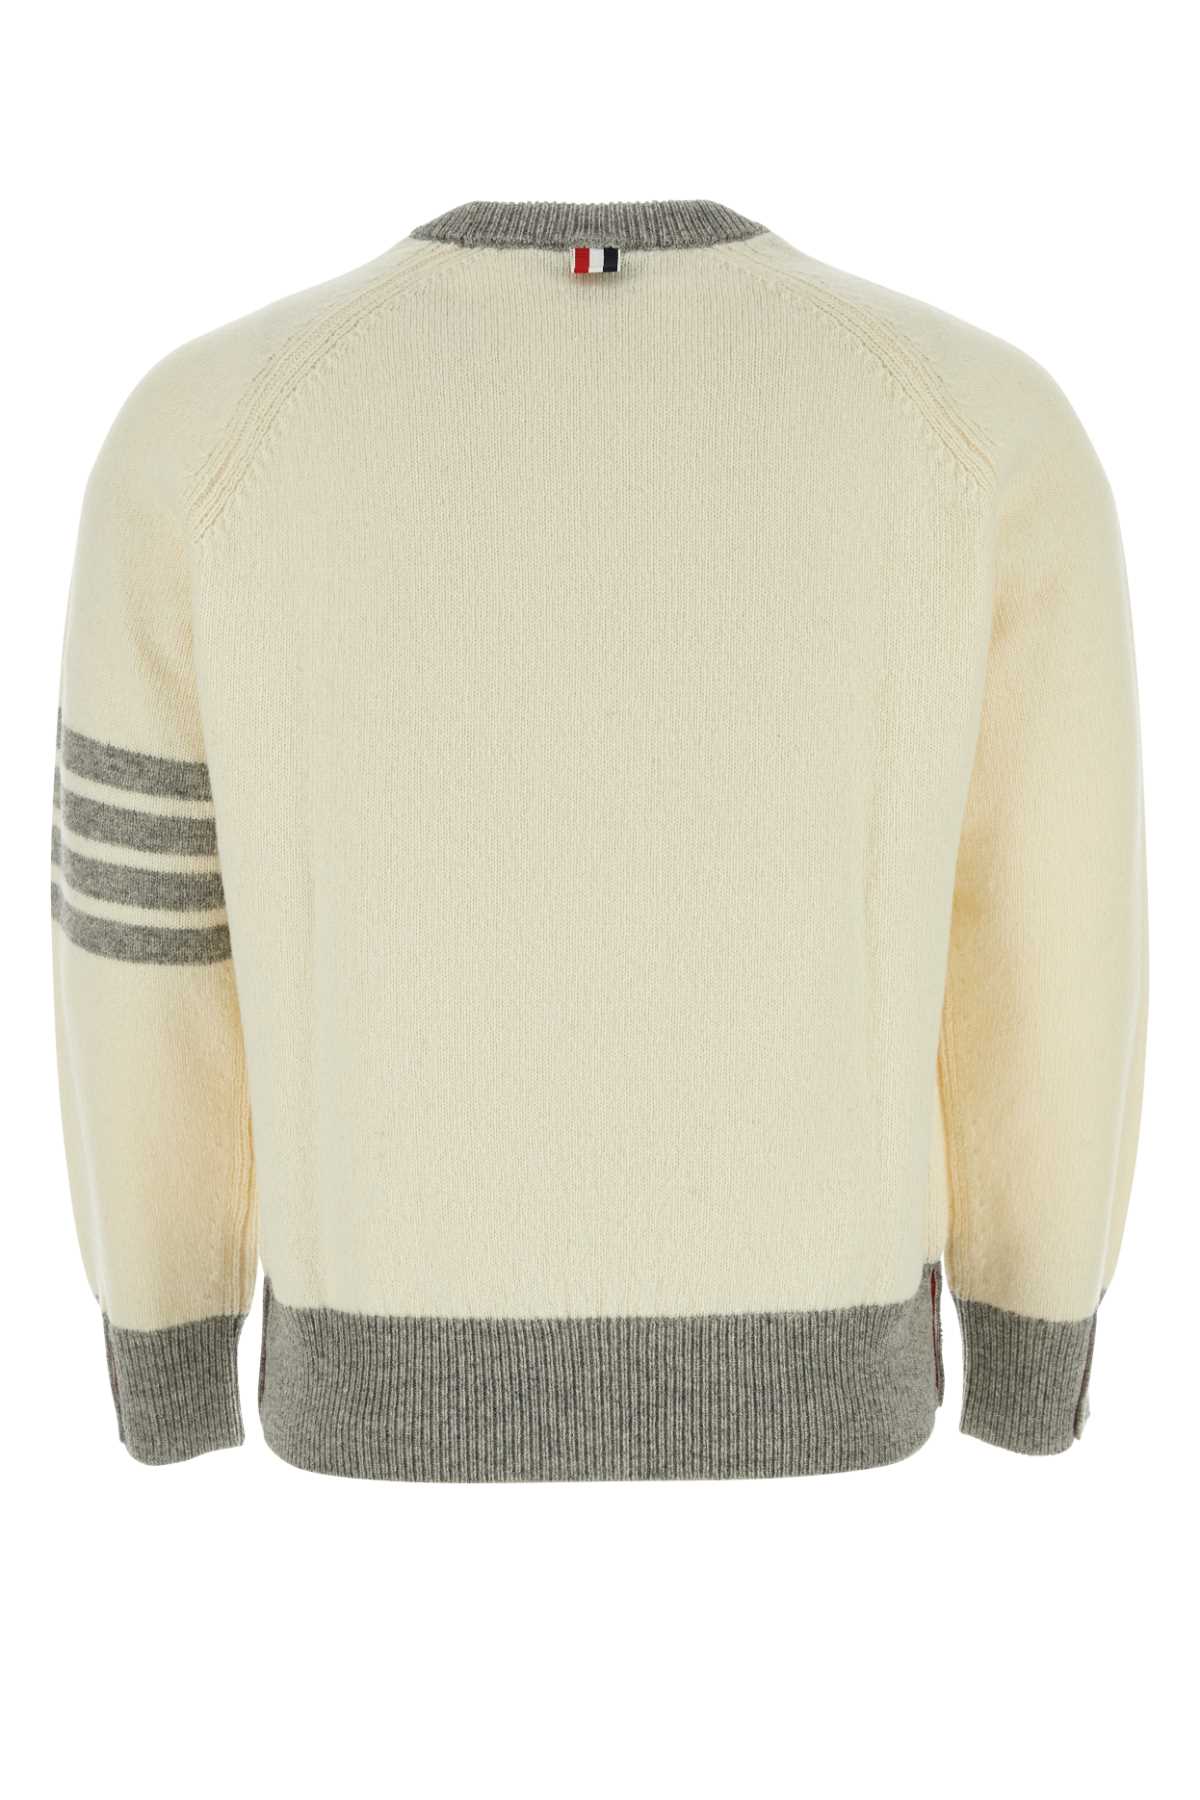 Thom Browne Ivory Wool Sweater In White